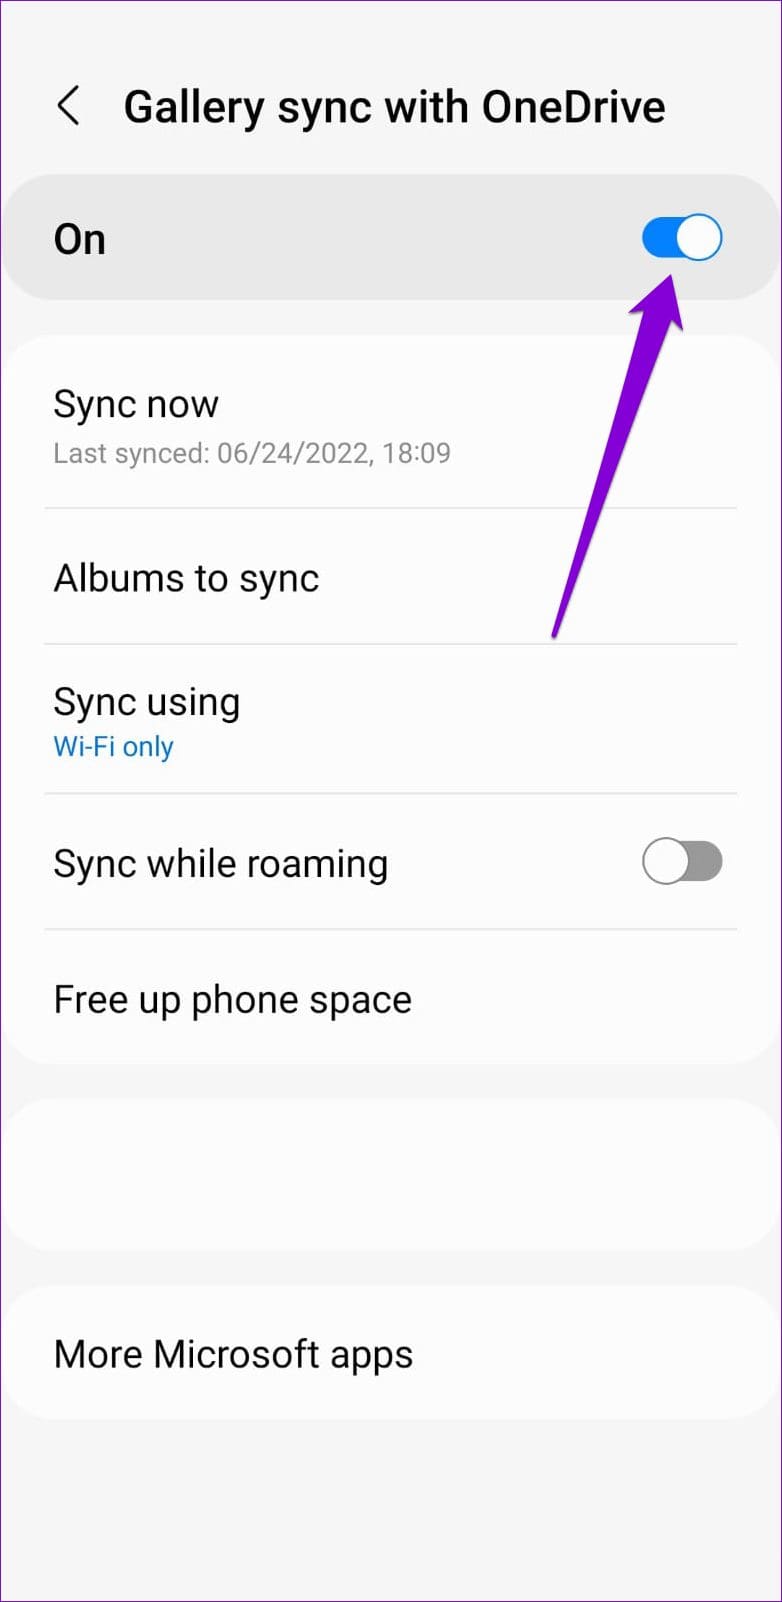 Enable OneDrive Sync in the Gallery App